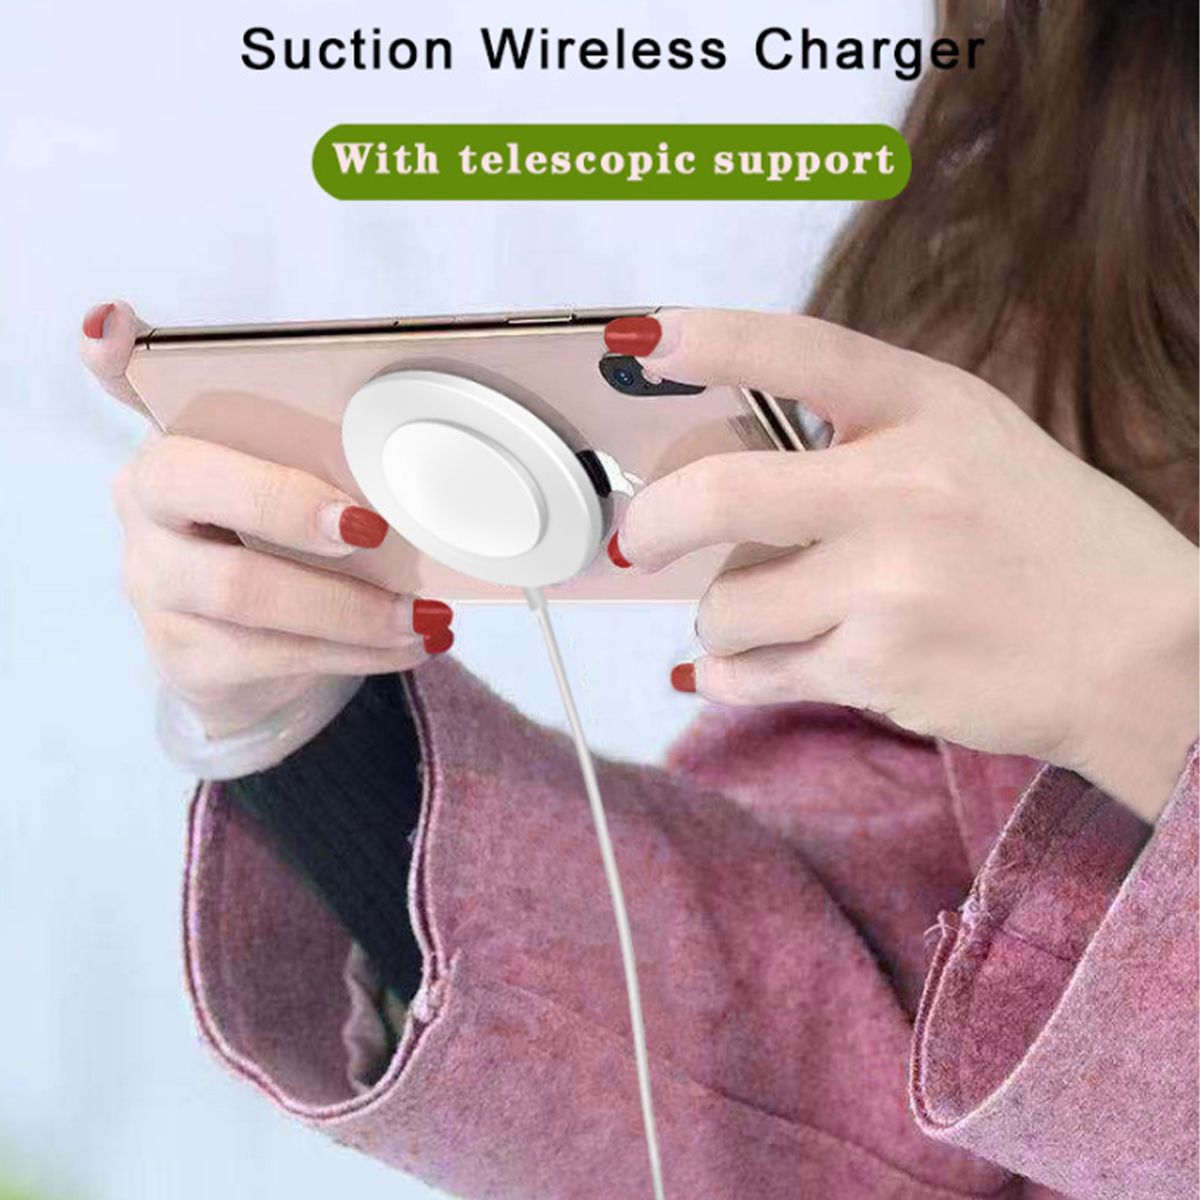 Bakeey-3-in-1-Wireless-Charger-Qi-Phone-Suction-Cup-Type-c-Lightning-Cable-Fast-Charging-For-iPhone--1738781